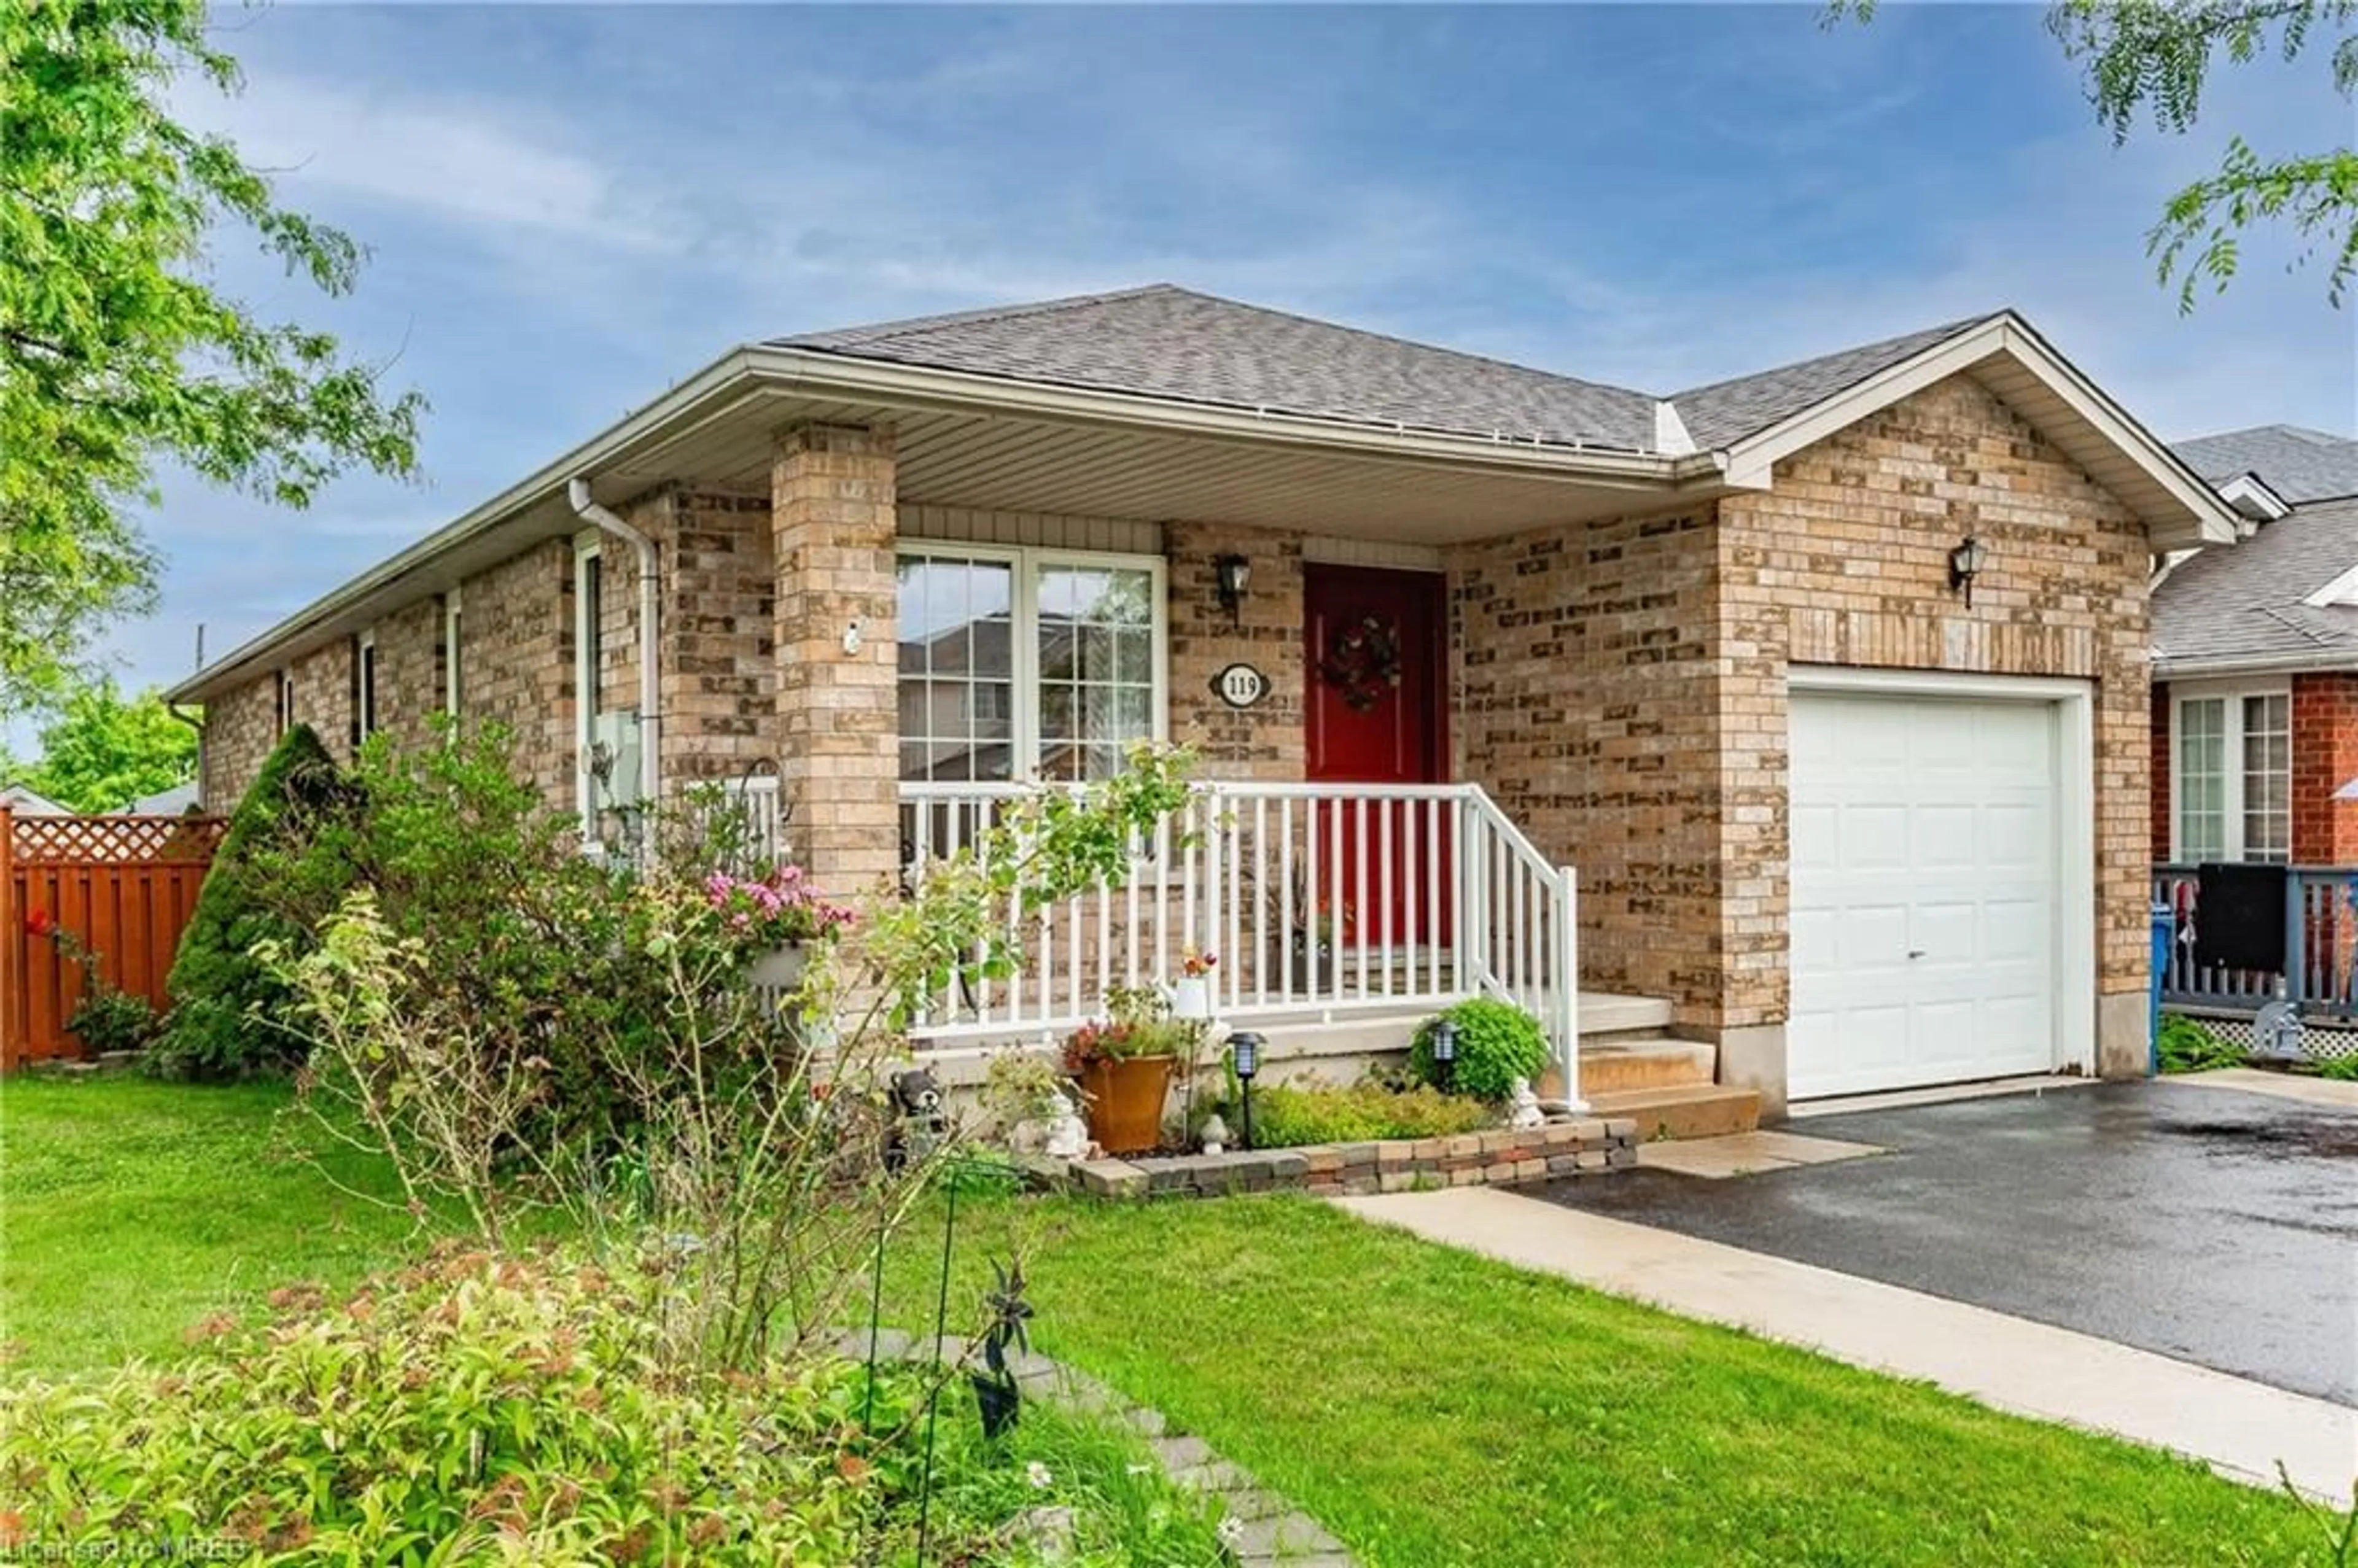 Home with brick exterior material for 119 Silurian Dr, Guelph Ontario N1E 7G2